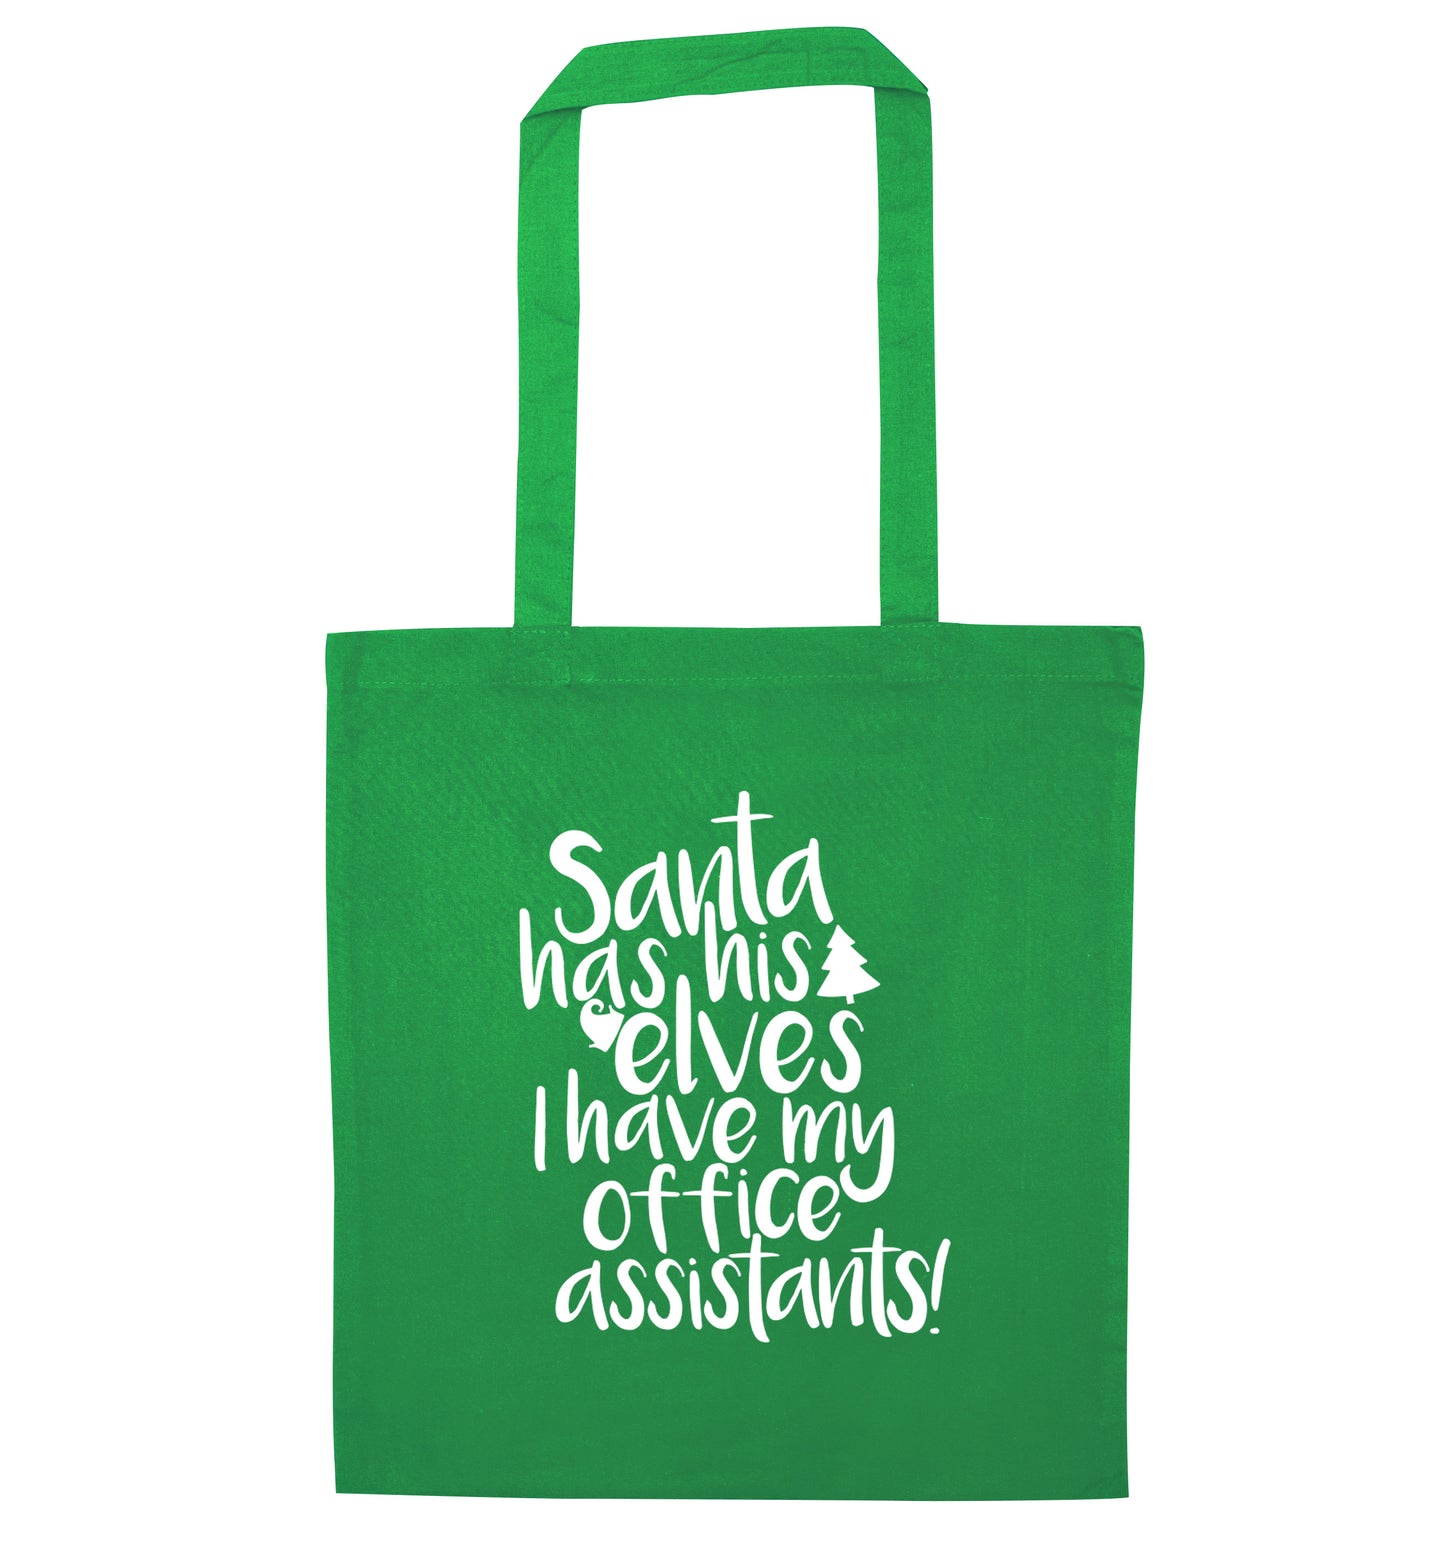 Santa has his elves I have my office assistants green tote bag